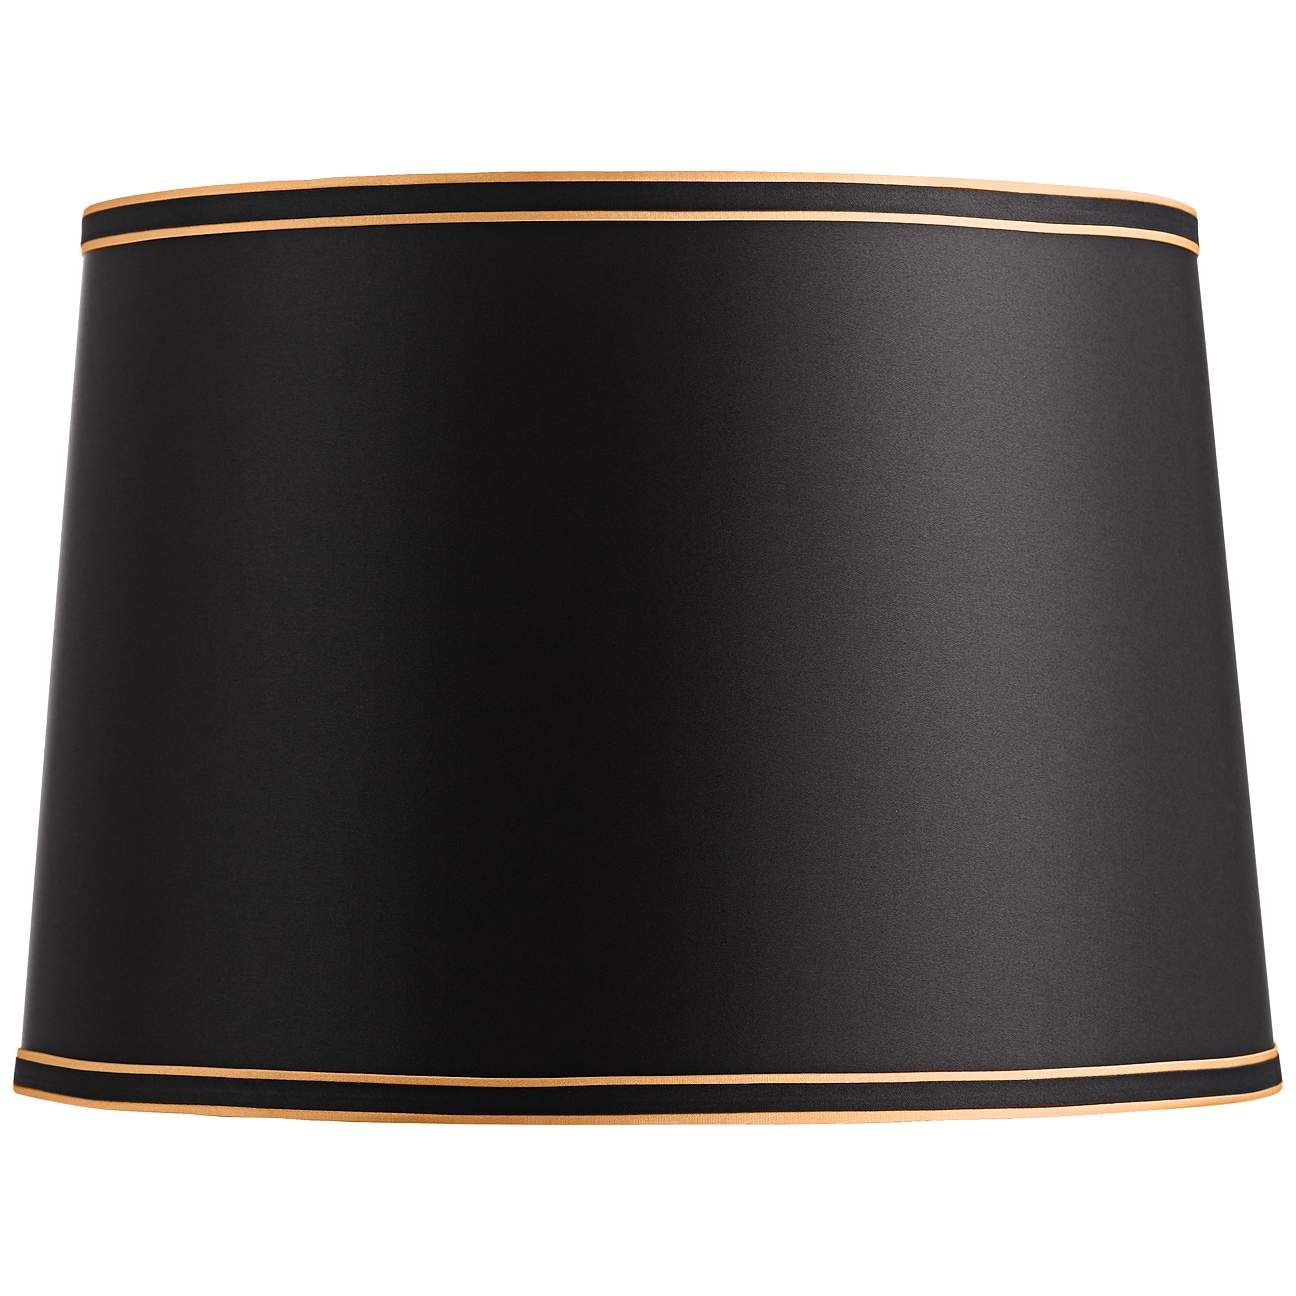 Black Shade with Black and Gold Trim 14x16x11 (Spider) | Lamps Plus